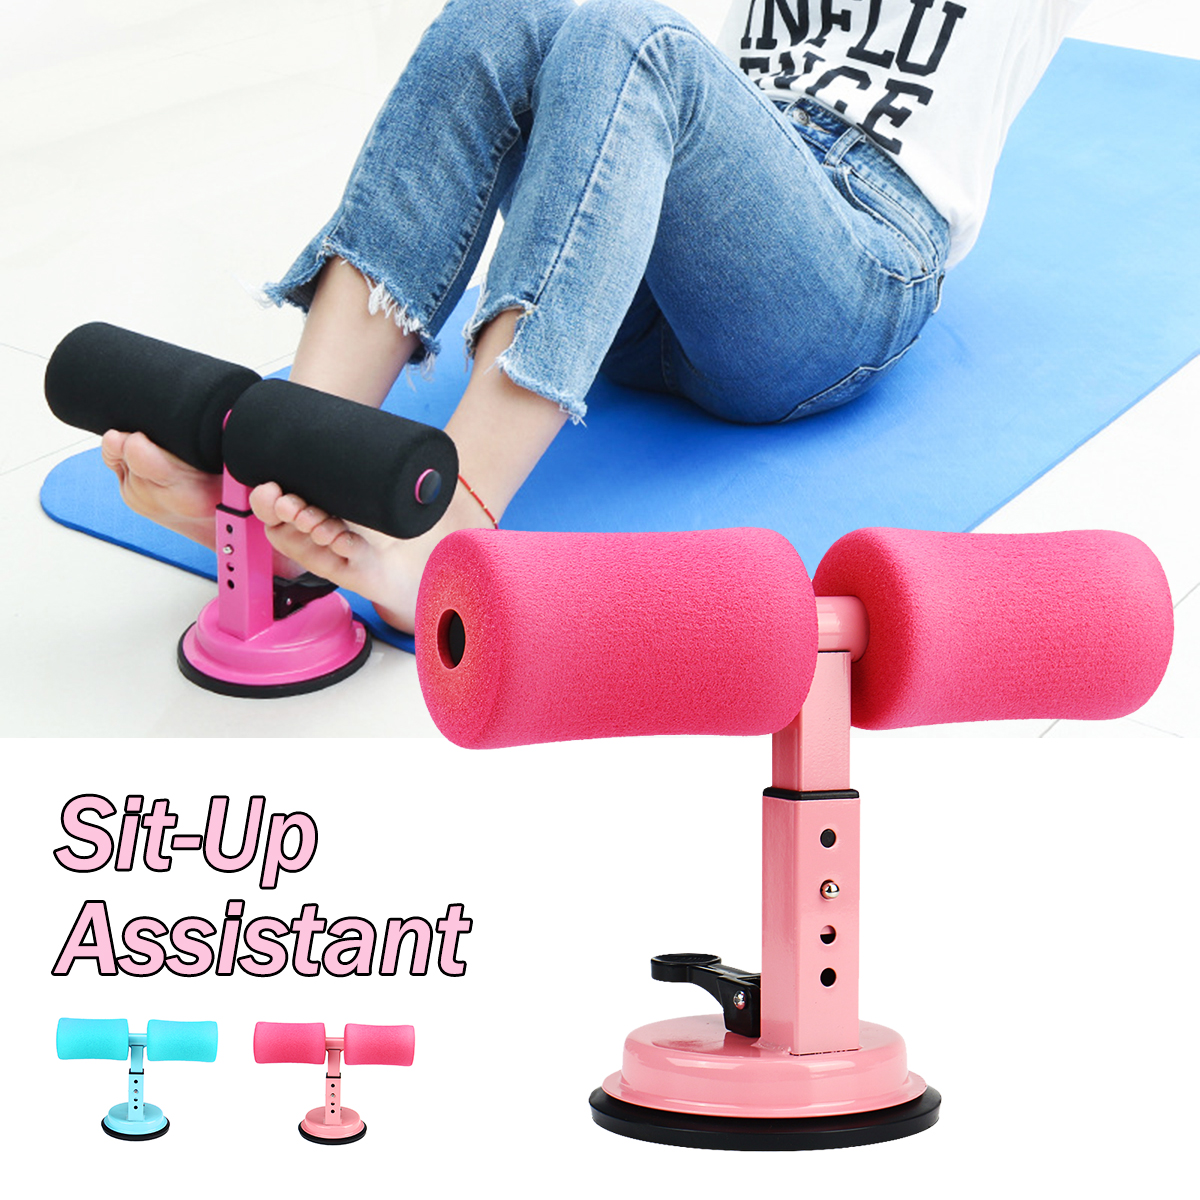 Adjustable-Sit-Up-Assistant-Bars-Abdominal-Core-Fitness-Workout-Stand-Portable-Situp-Suction-Home-Gy-1697292-1